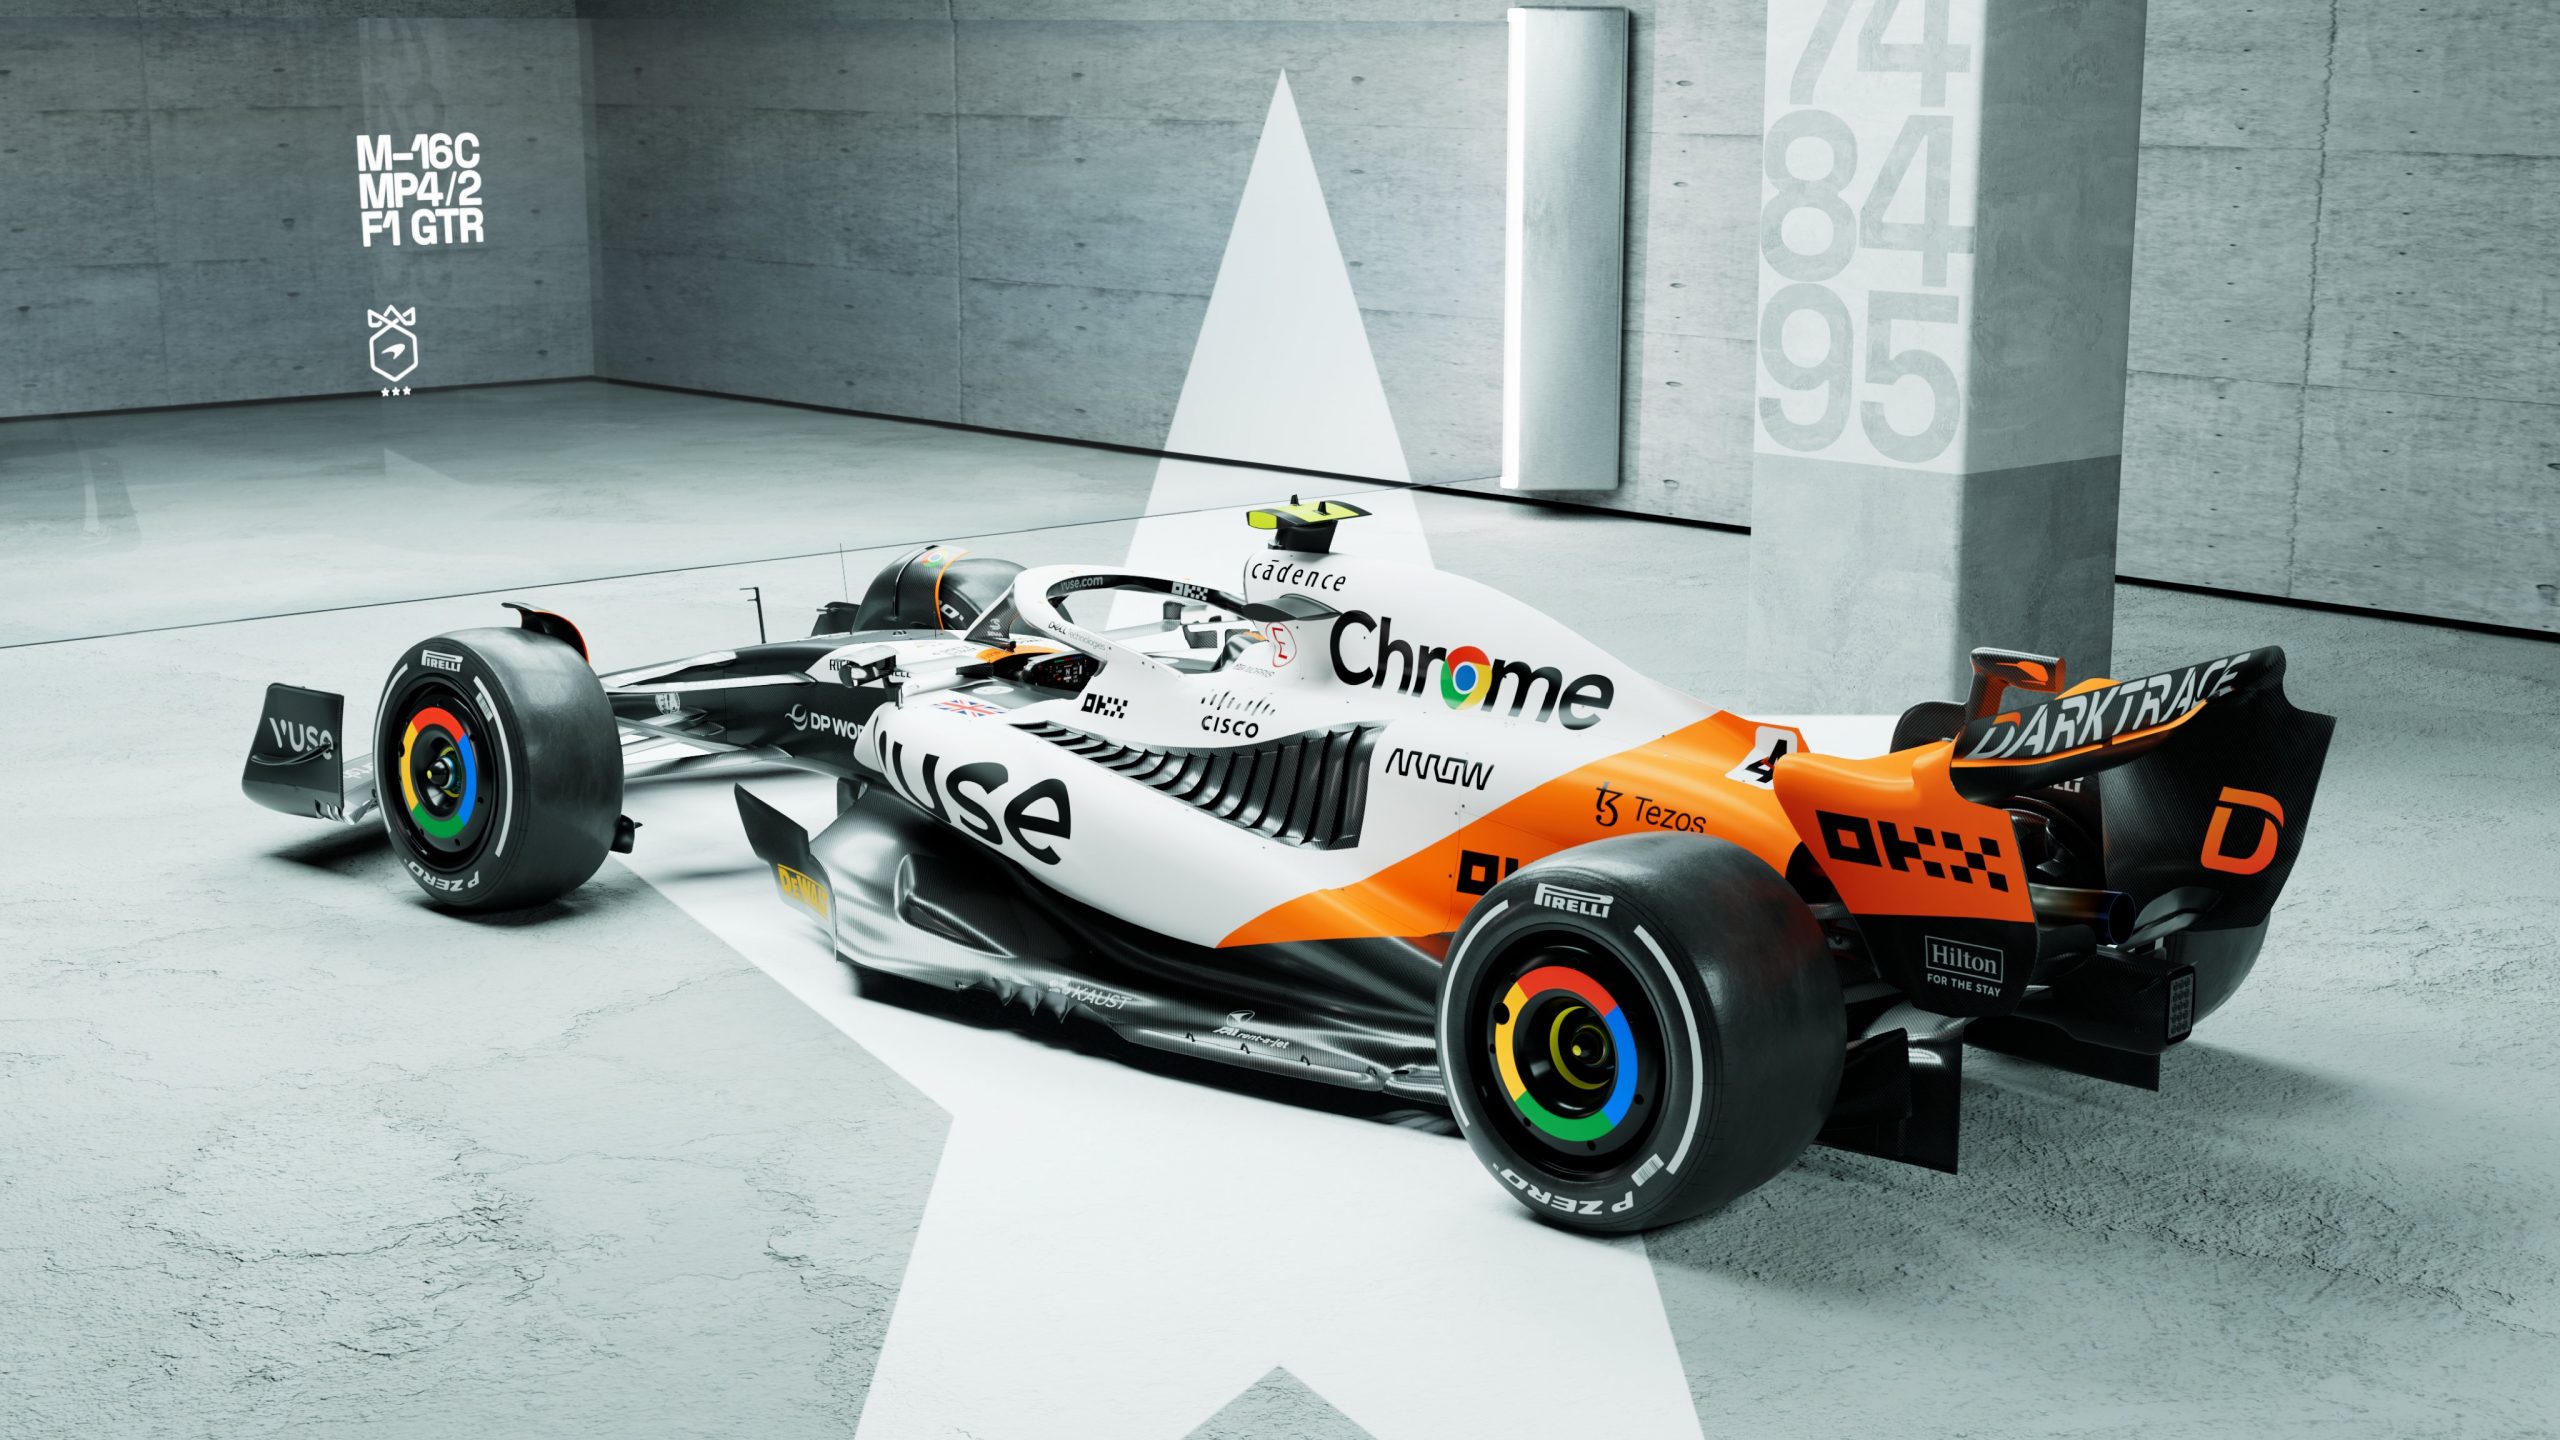 McLaren rolls out special 'Triple Crown' livery for Monaco GP